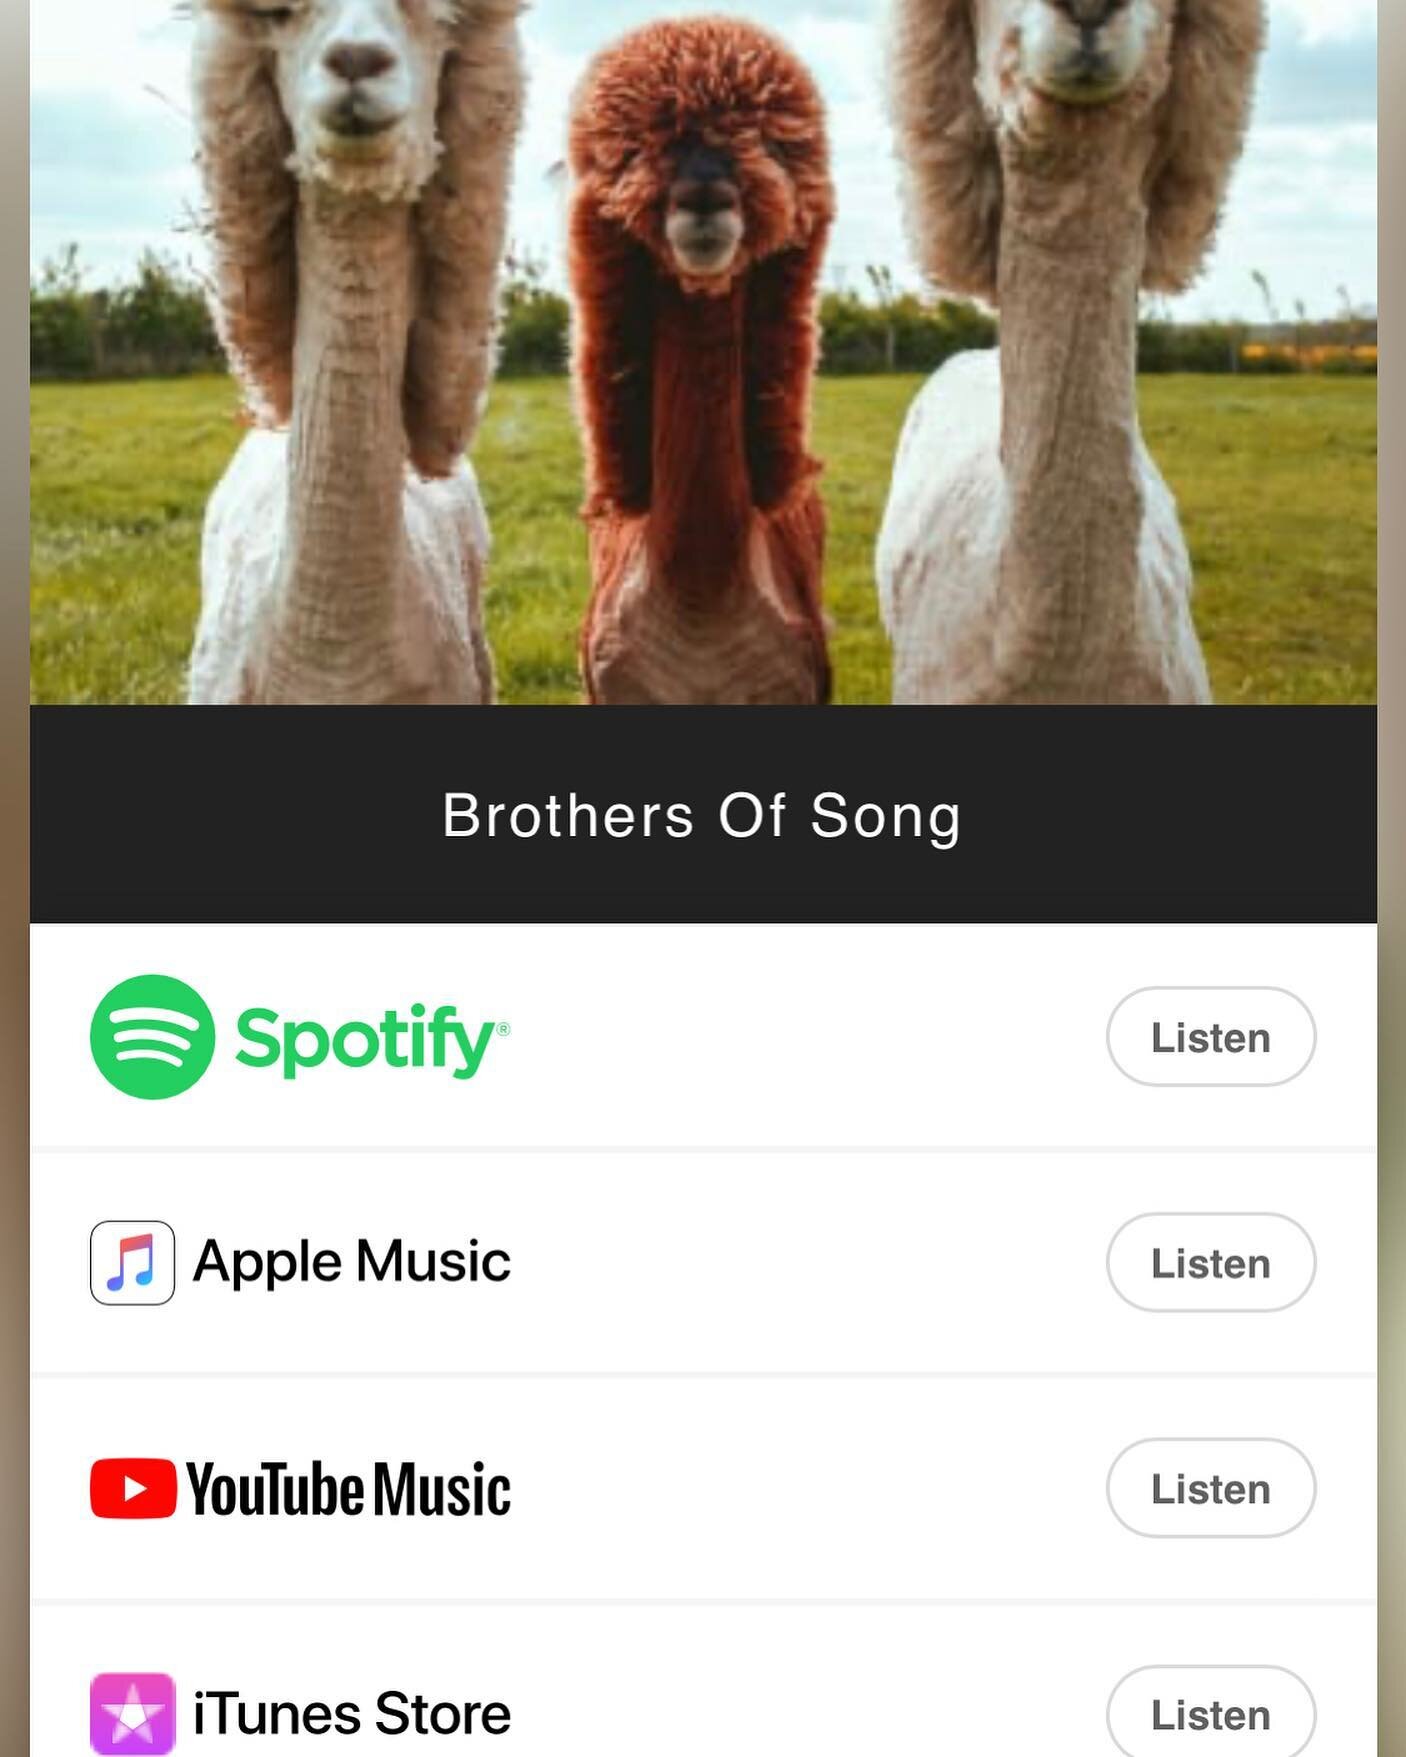 New link in bio posted to listen to our music on your favourite platform! #torontomusicians #torontoartist #newmusicalert #newmusiccomingsoon #brothersofsong #alpaca